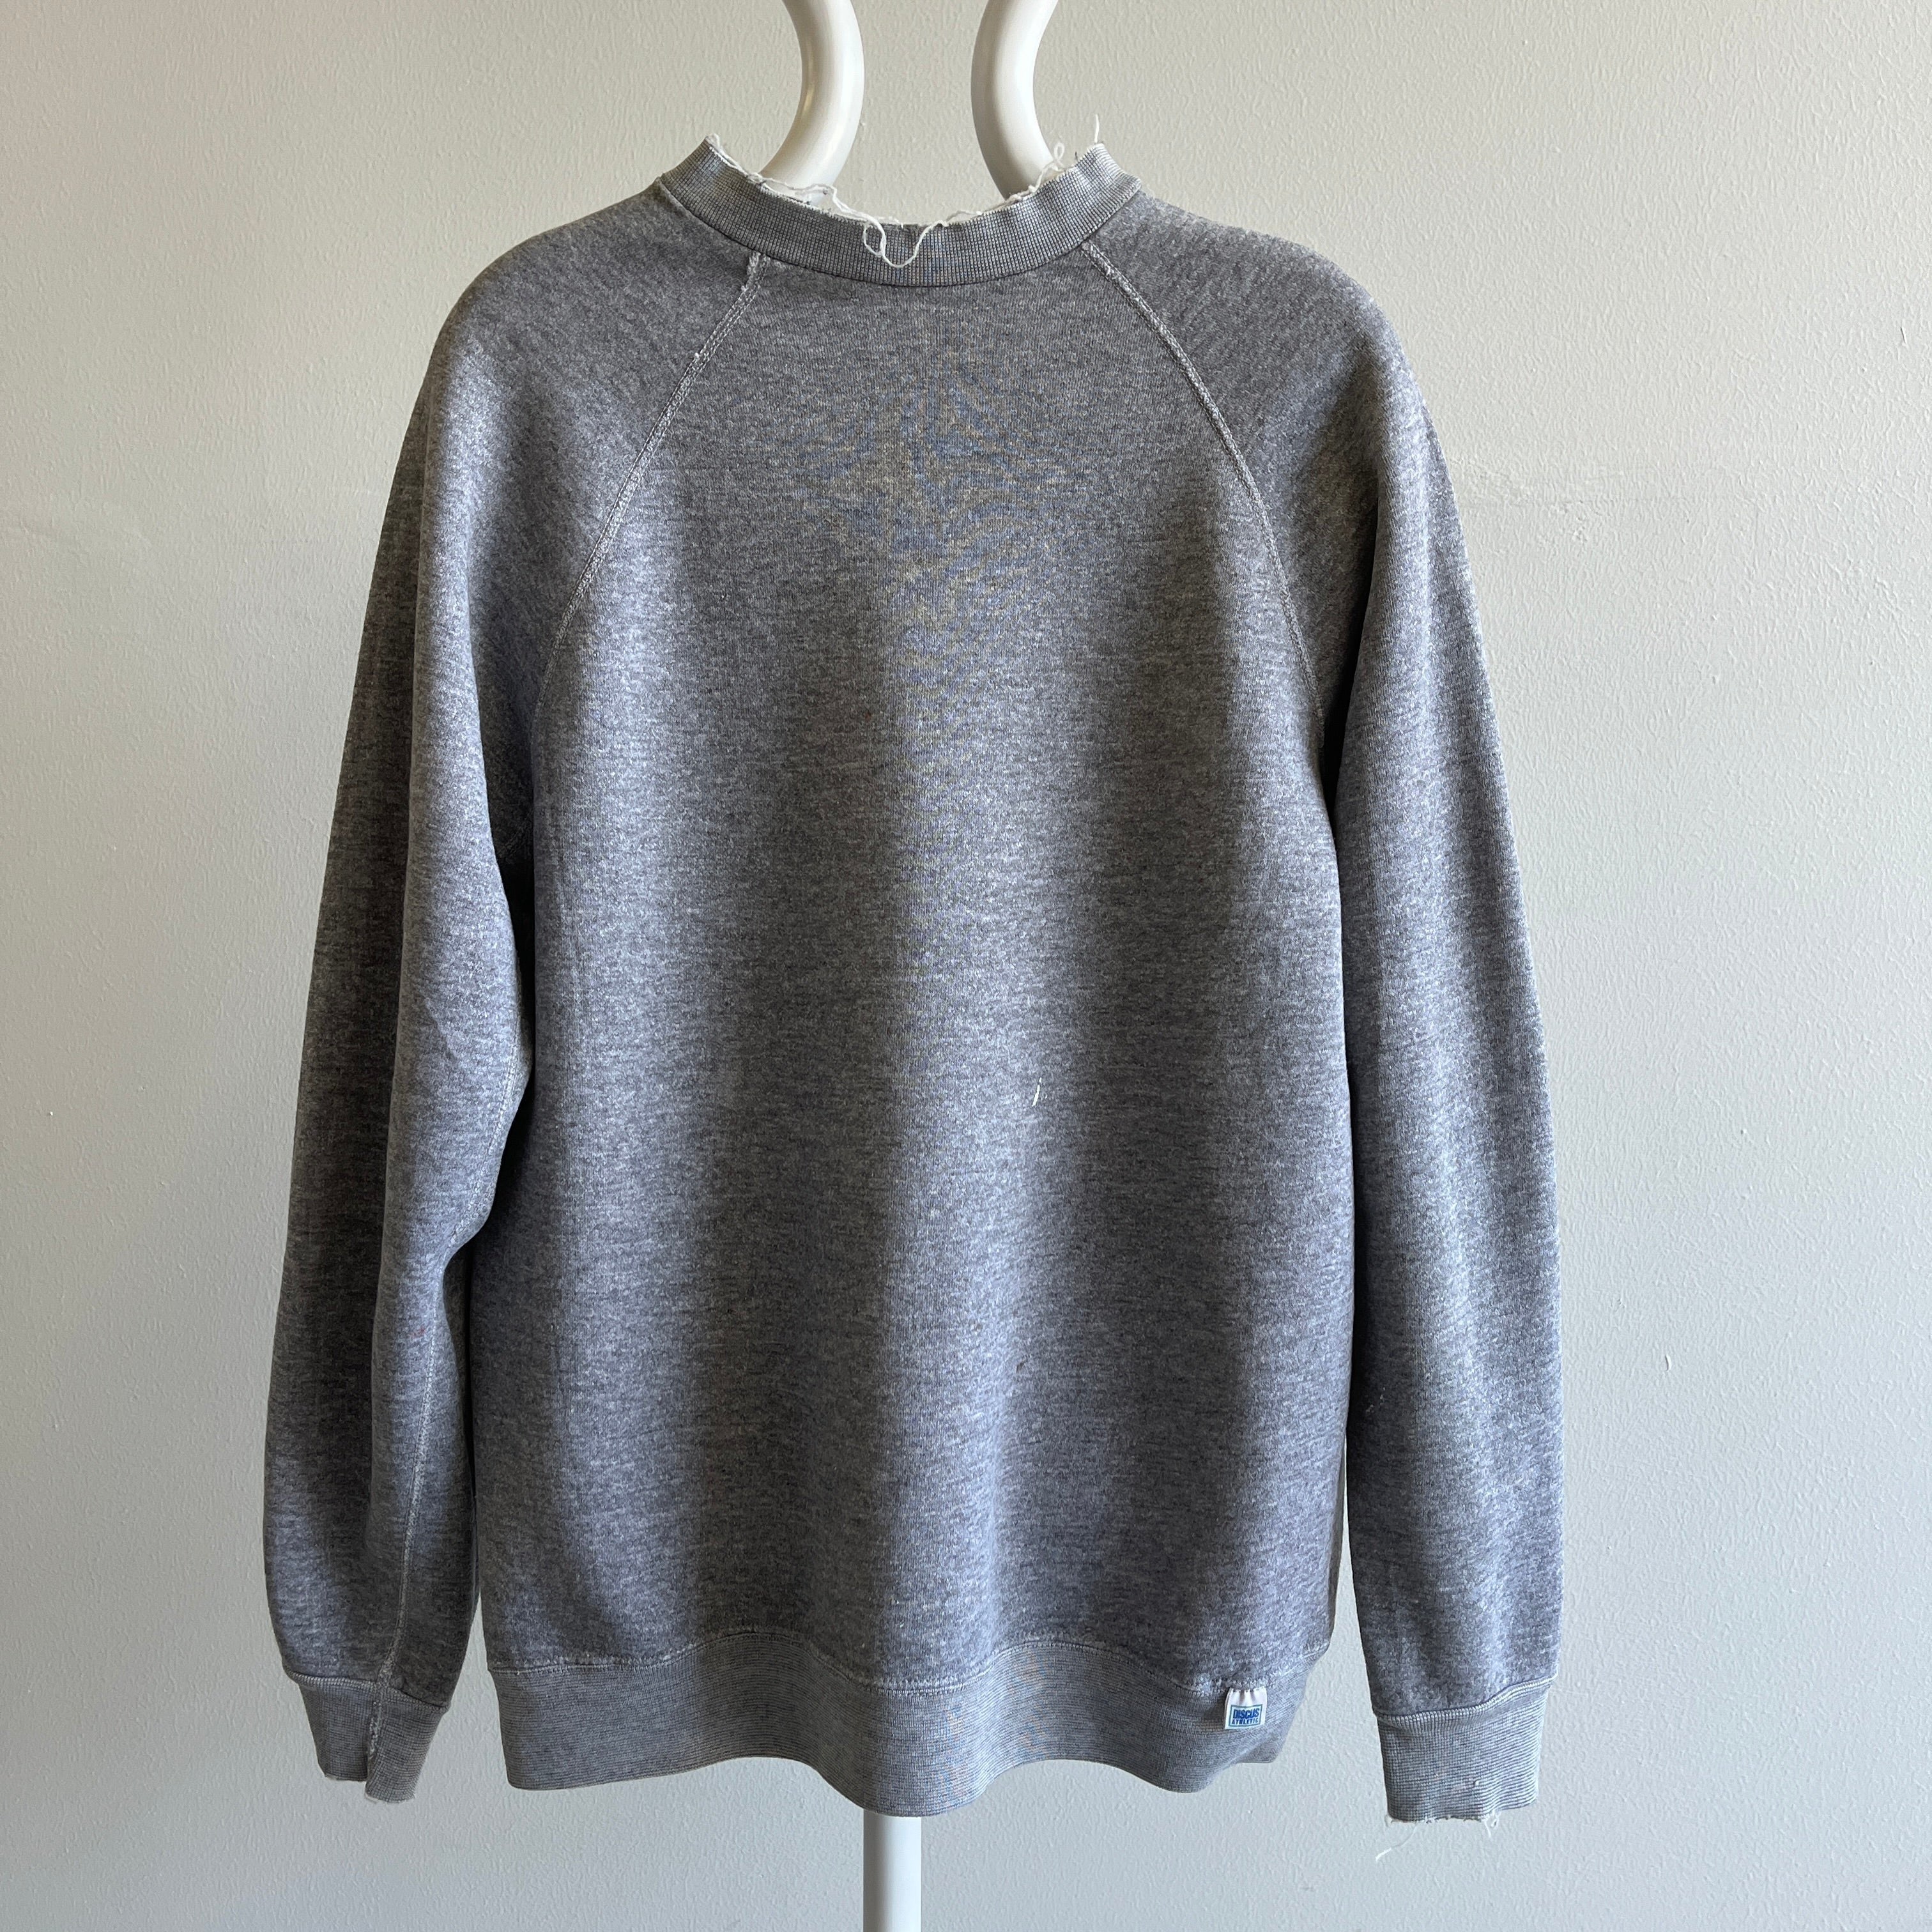 1980s Perfectly Tattered Heavyweight Structured Blank Gray Discus Sweatshirt